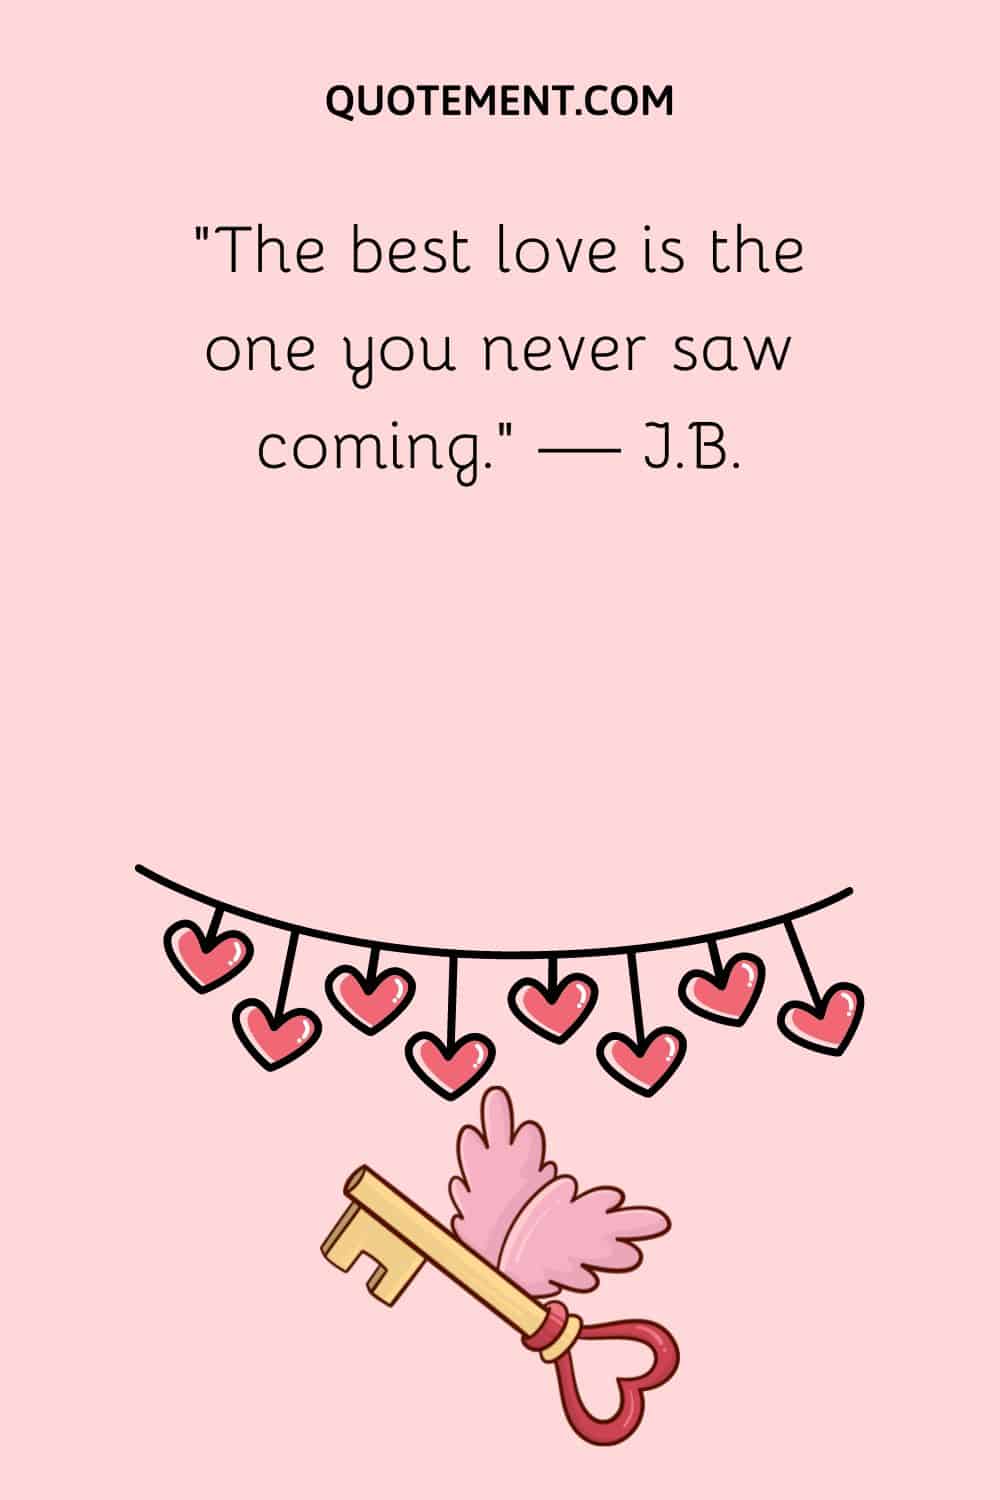 “The best love is the one you never saw coming.” — J.B.